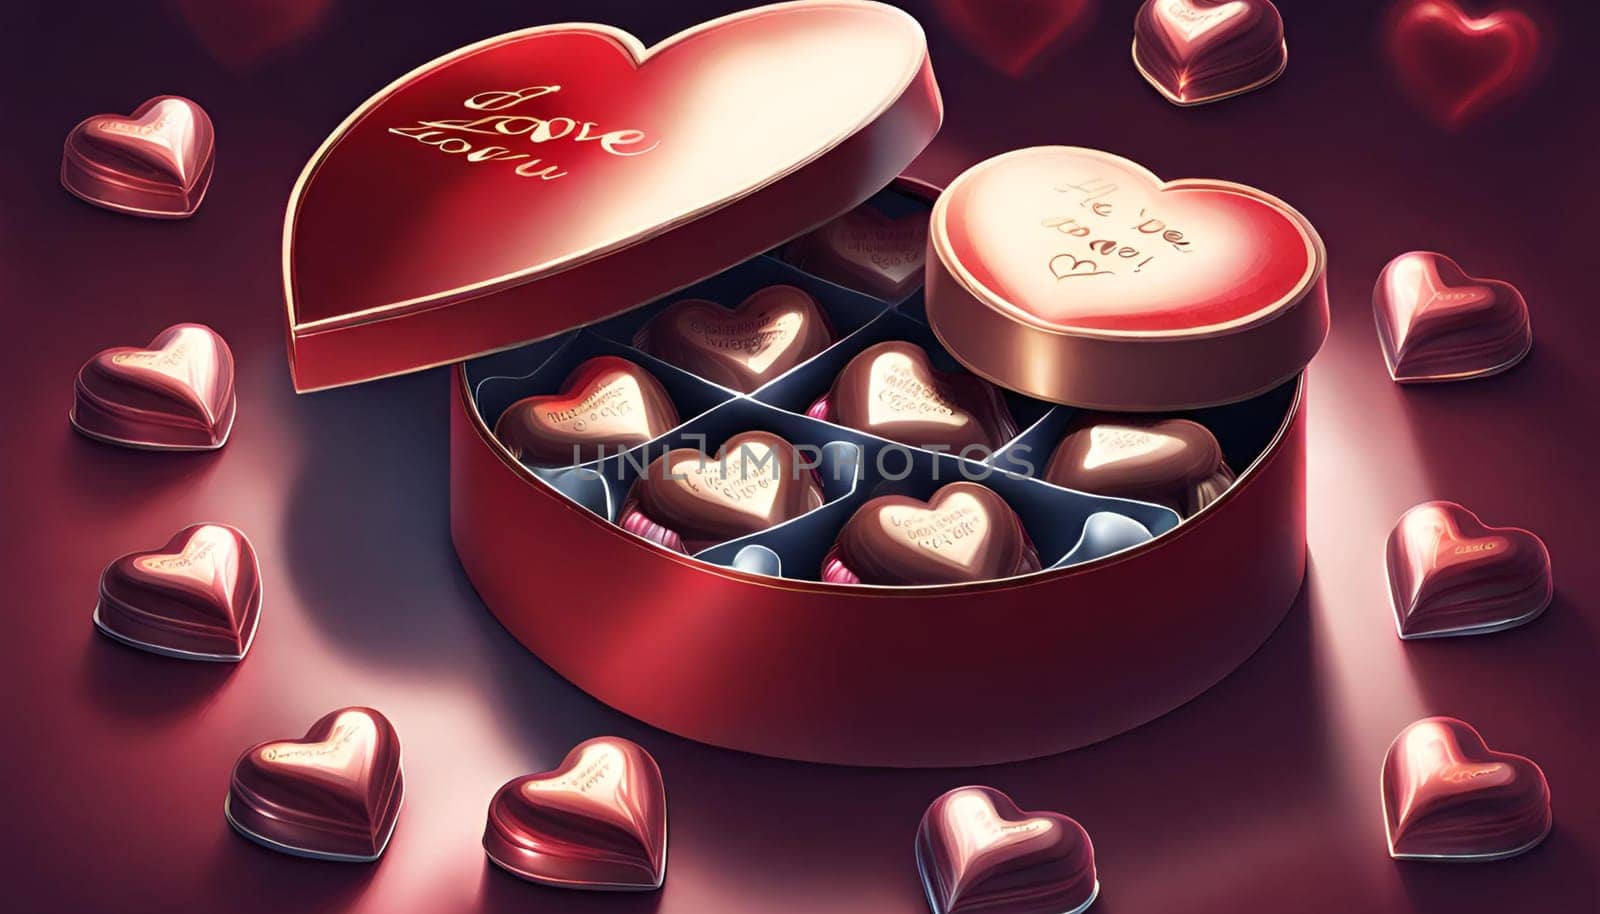 valentine's Day. A heart-shaped box of chocolates wrapped in red foil.Happy Valentine's Day by Designlab